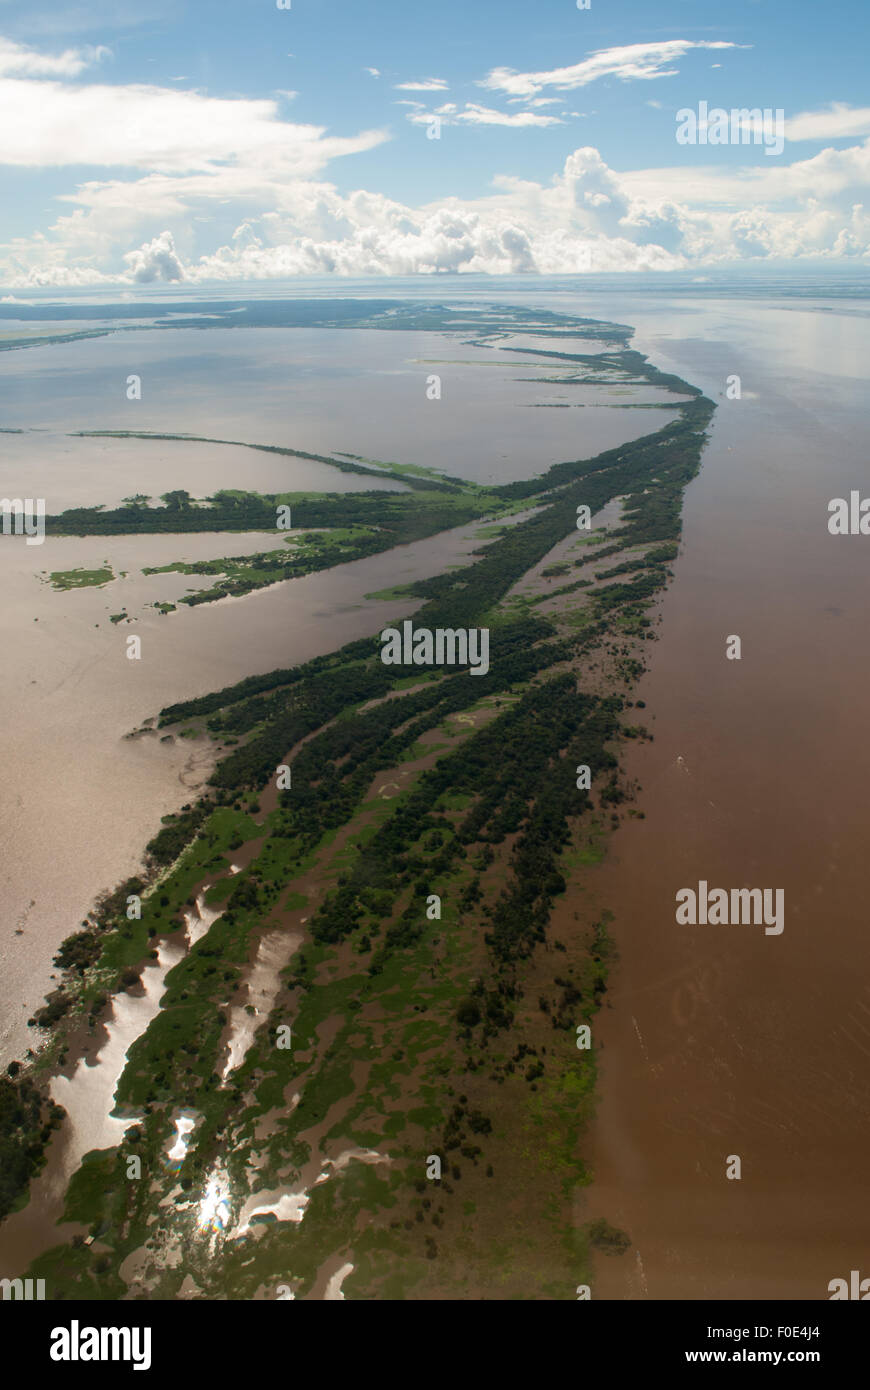 Amazonas, Brazil. Aerial view of flooded archipelago in the Amazon river. Stock Photo